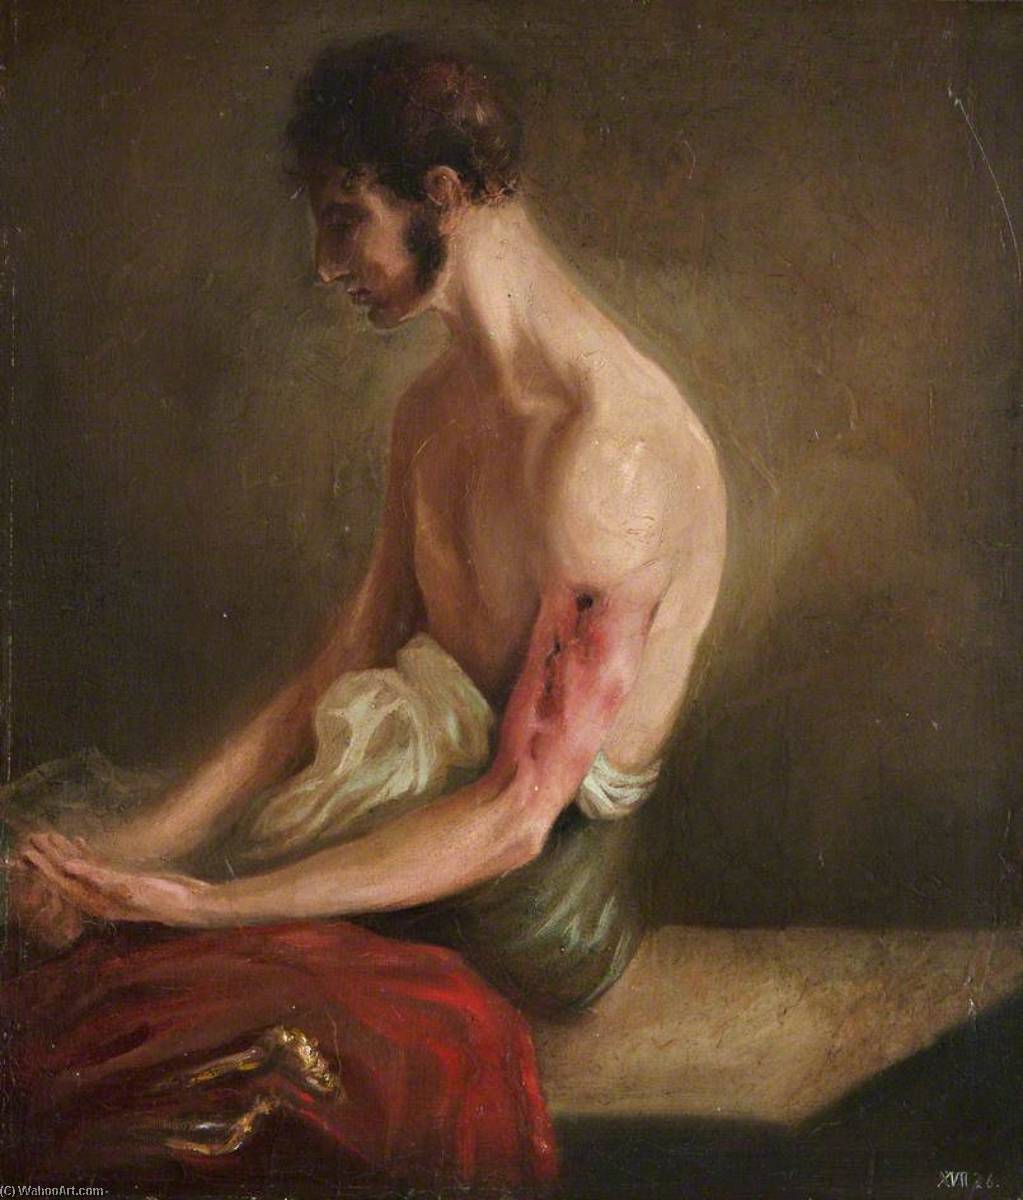 Order Art Reproductions The Wounded following the Battle of Corunna Gunshot Fracture of Shaft of Humerus, 1809 by Charles Bell (Inspired By) (1935-1995, United States) | ArtsDot.com